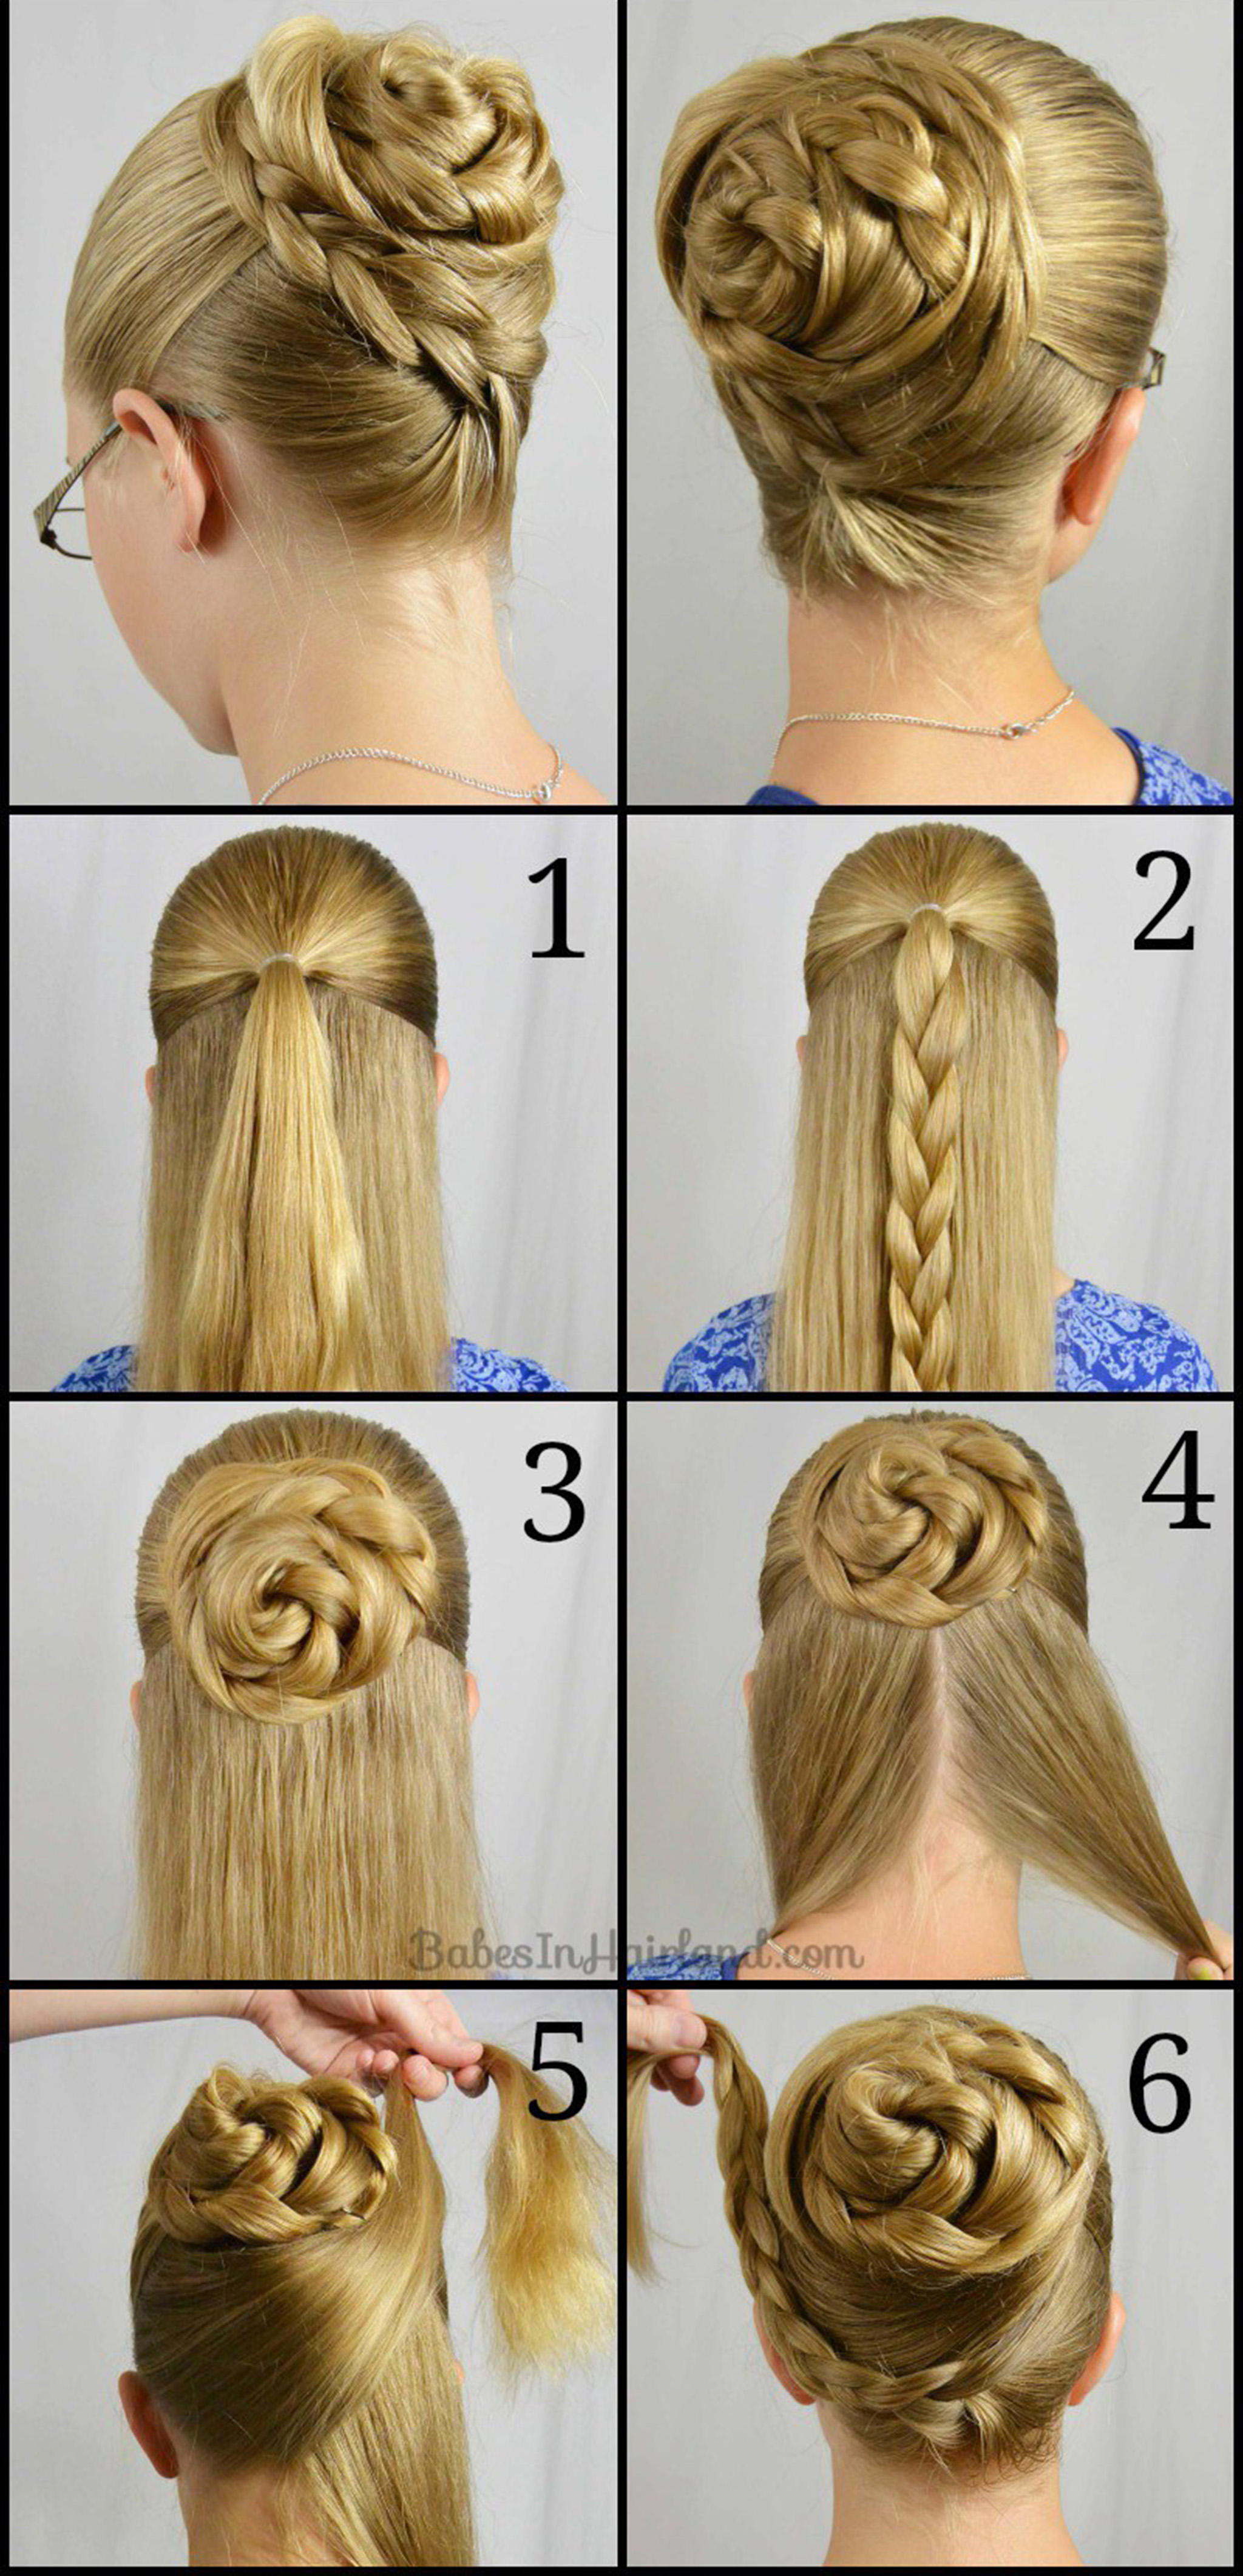 How To Make Cute Hairstyles